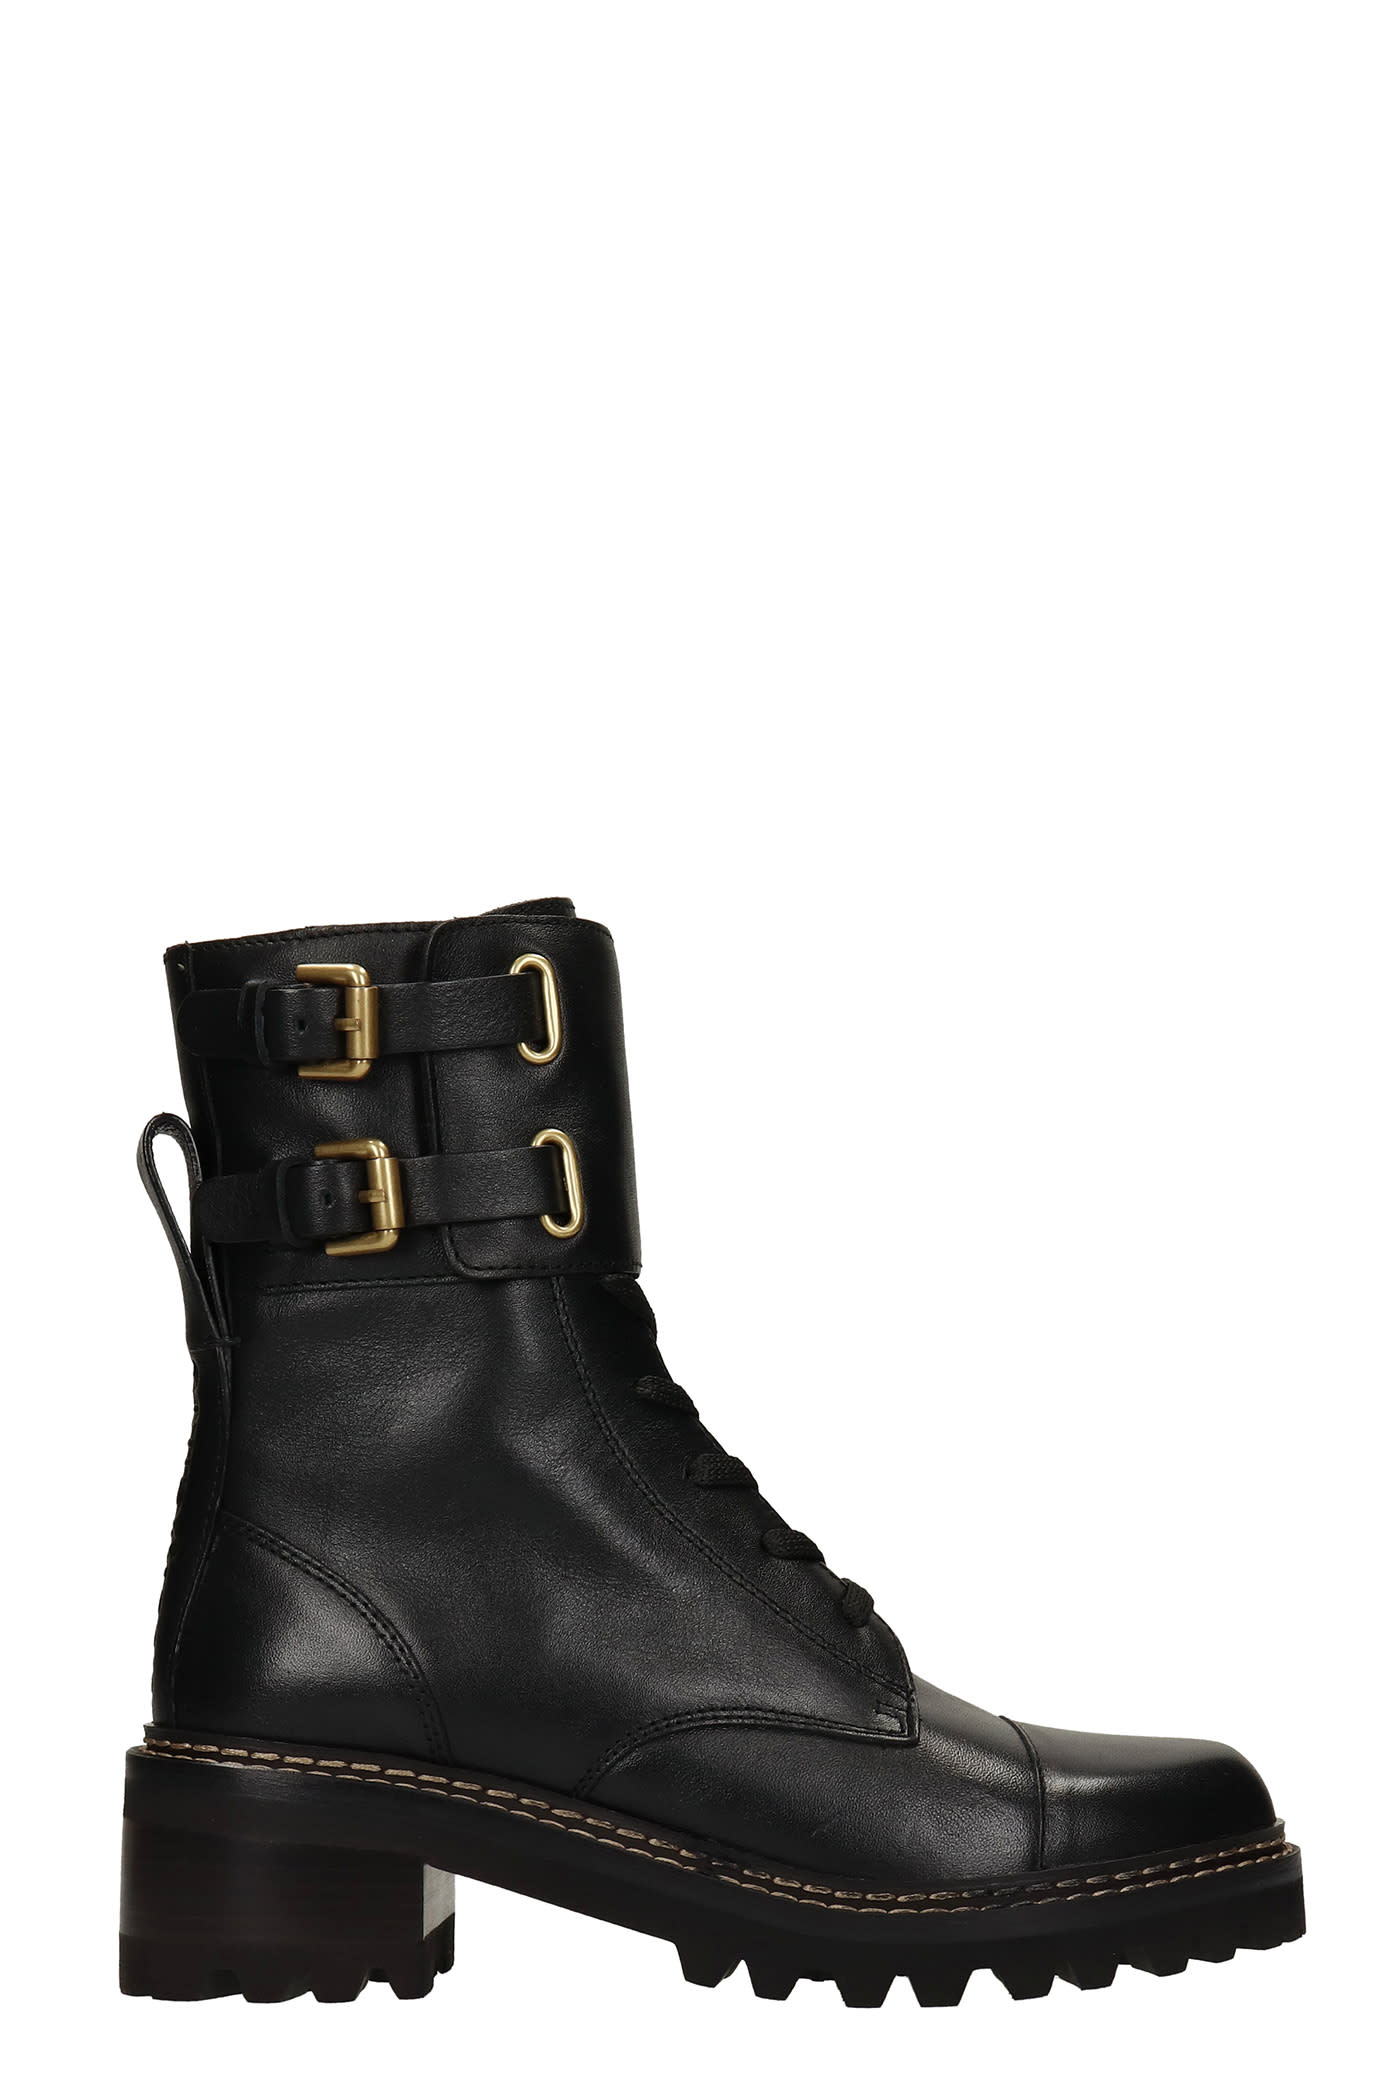 See by Chloé Mallory Combat Boots In Black Leather